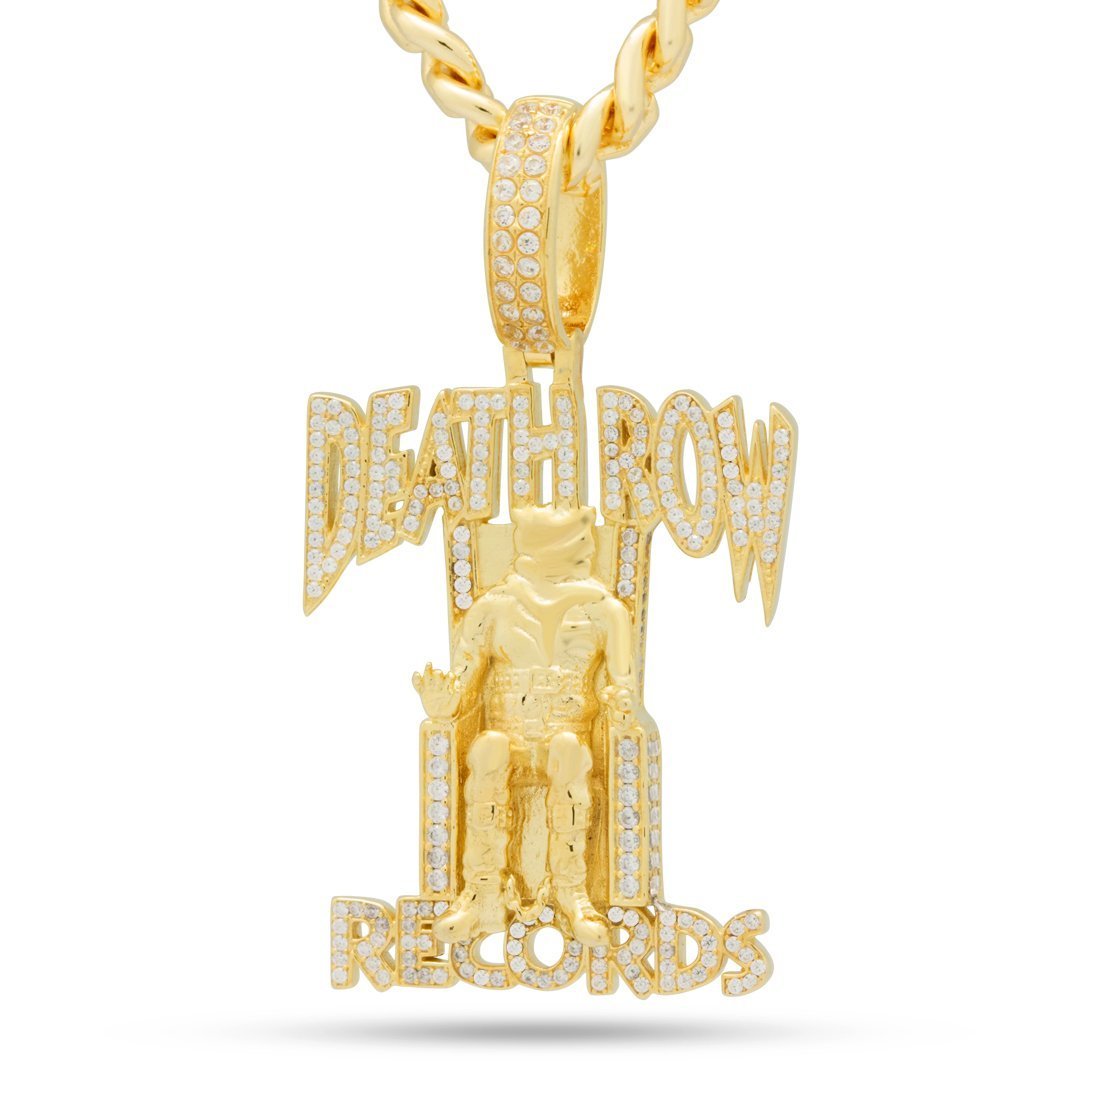 JCX DEATH ROW RECORDS ICED LOGO NECKLACE